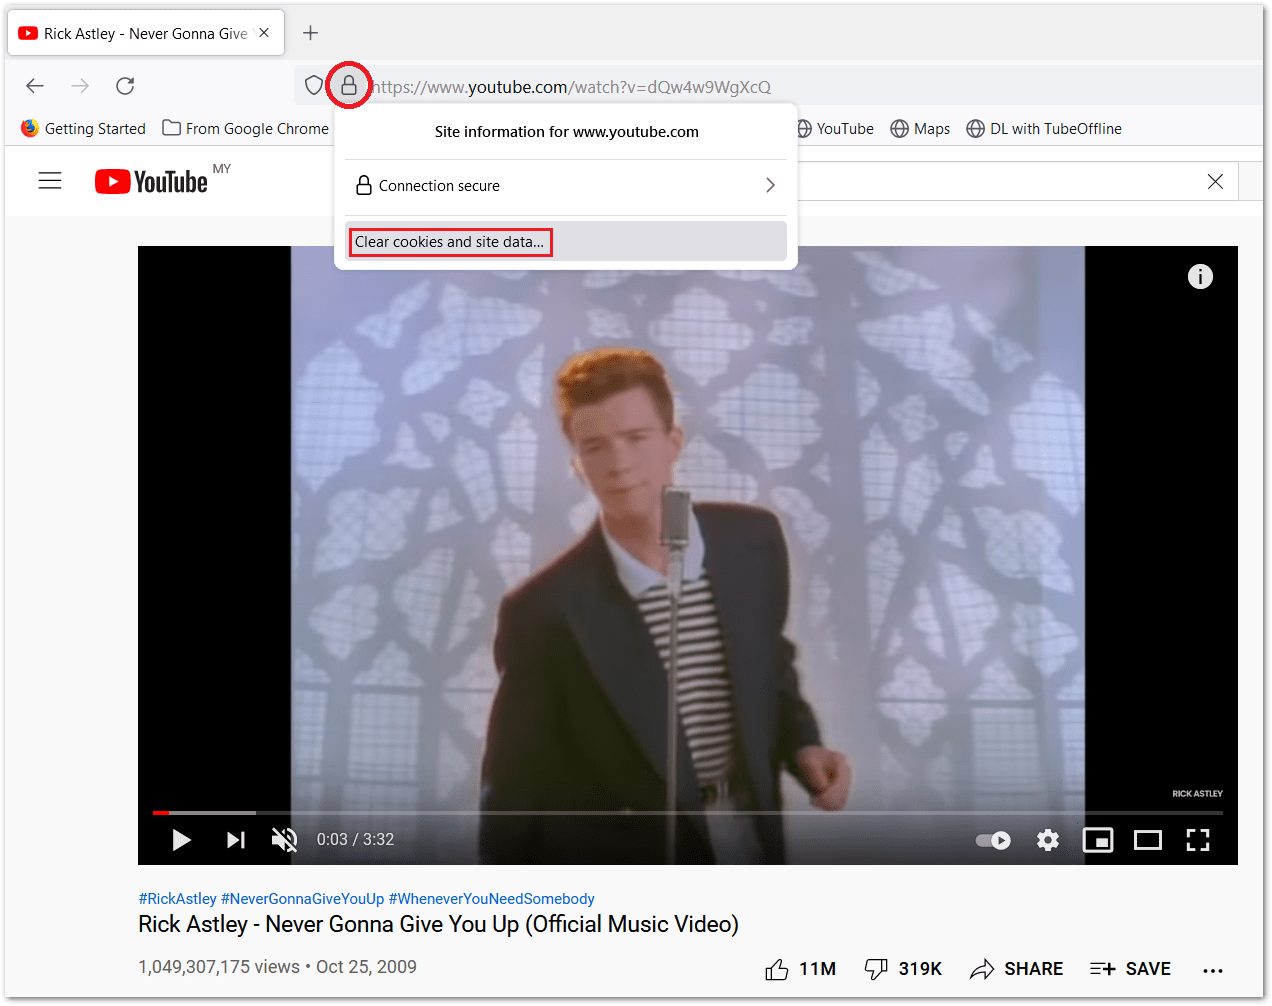 clear the YouTube website cache data and cookies on Mozilla Firefox on Windows to fix YouTube search bar and filters not working or showing results